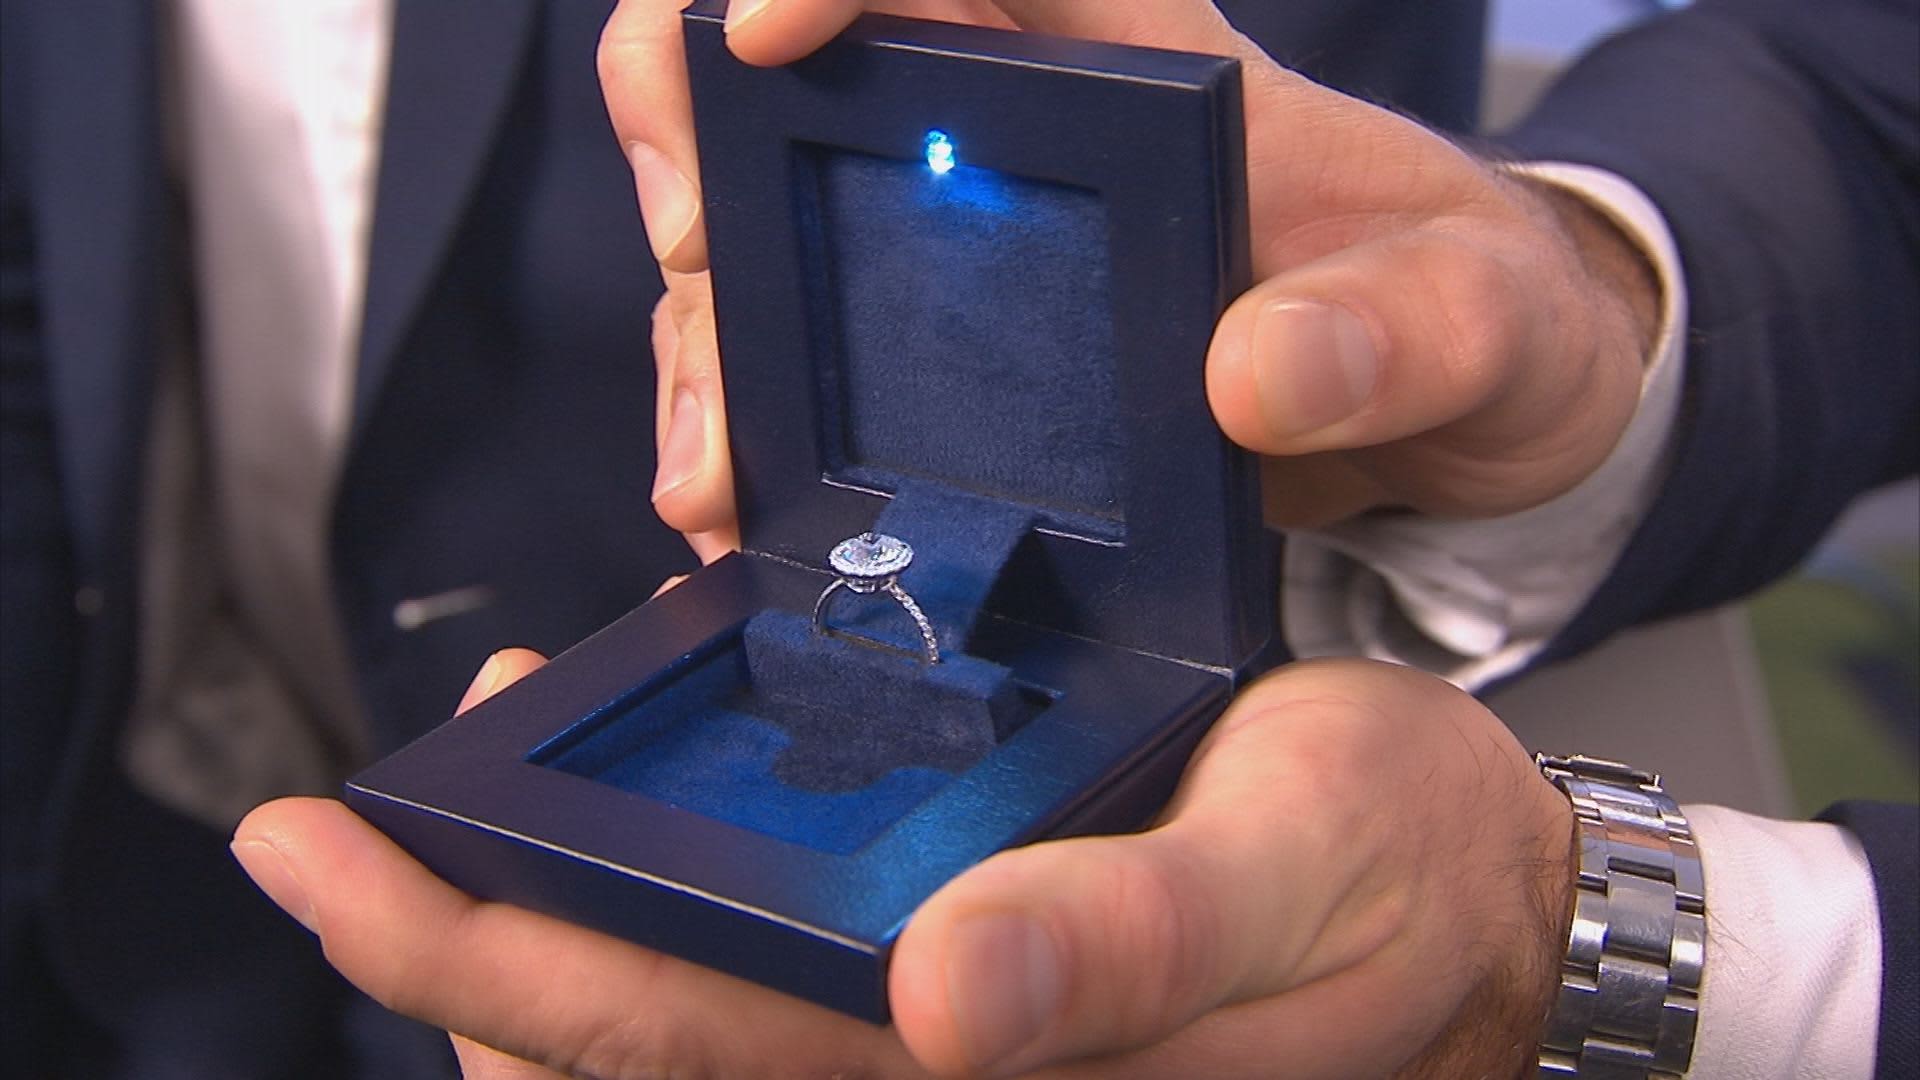 Start-Up Proposes A 'Secret' Box For Your Engagement Ring